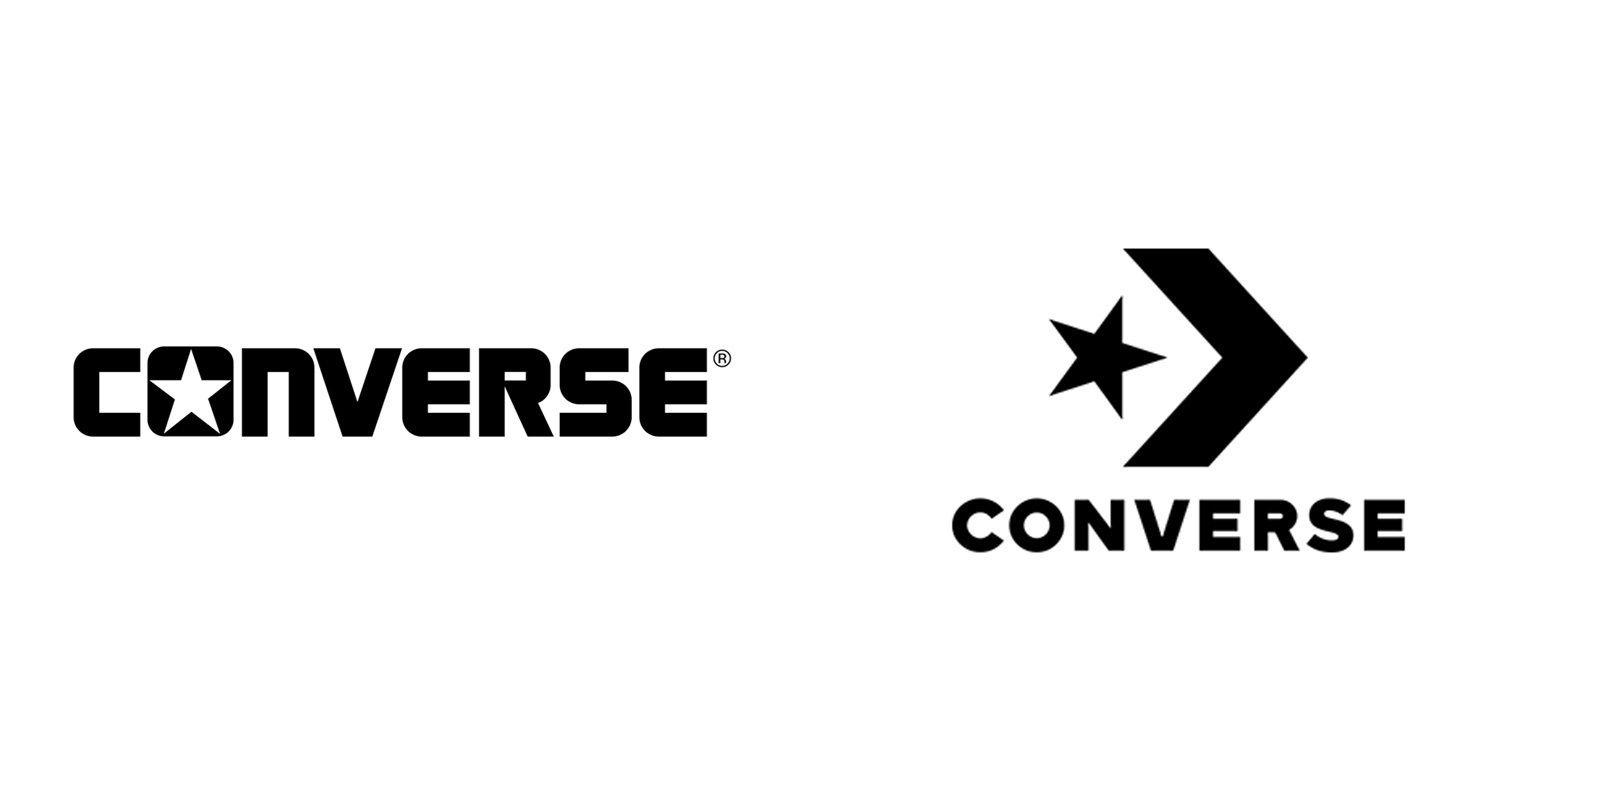 Cool Brand Logo - Converse redesigns logo with heritage in mind - Media Marketing